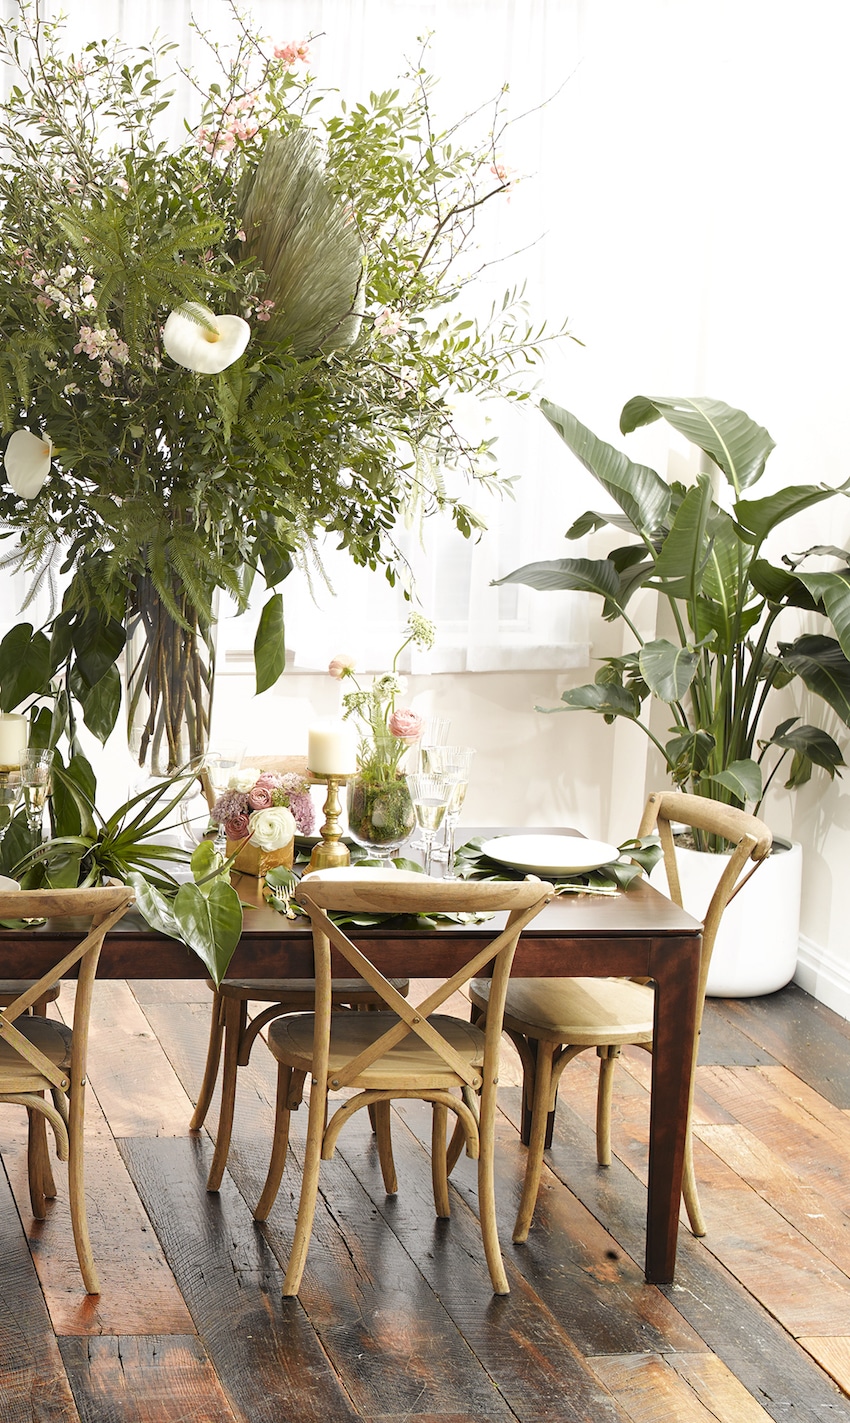 b-floral-dinner-party-on-fashionable-hostess-bistro-chairs